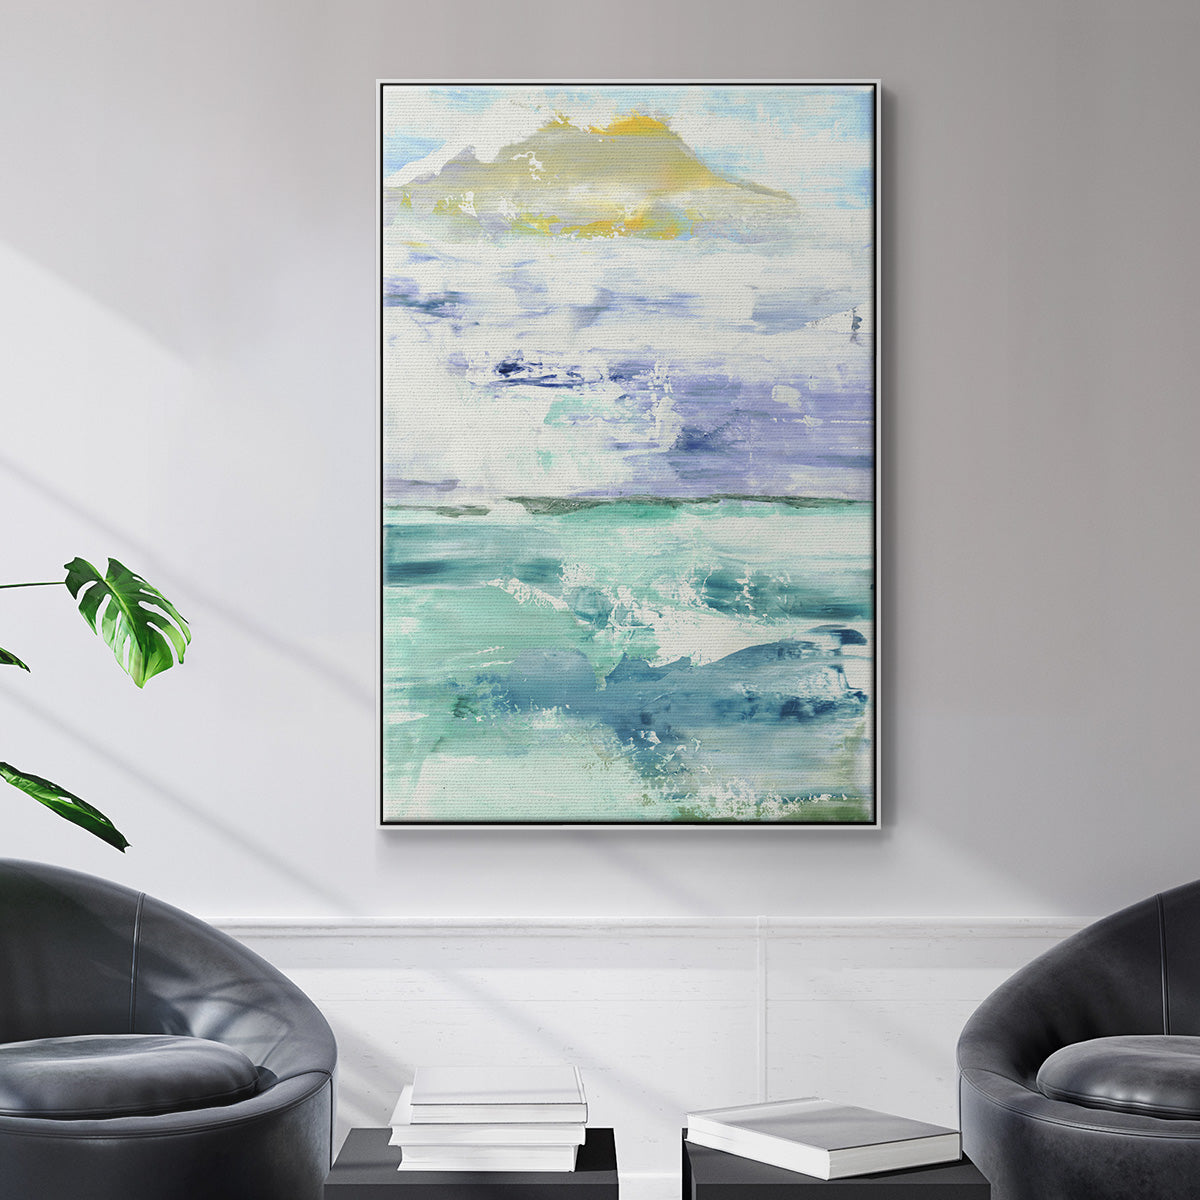 Fantasy Seascape - Framed Premium Gallery Wrapped Canvas L Frame - Ready to Hang